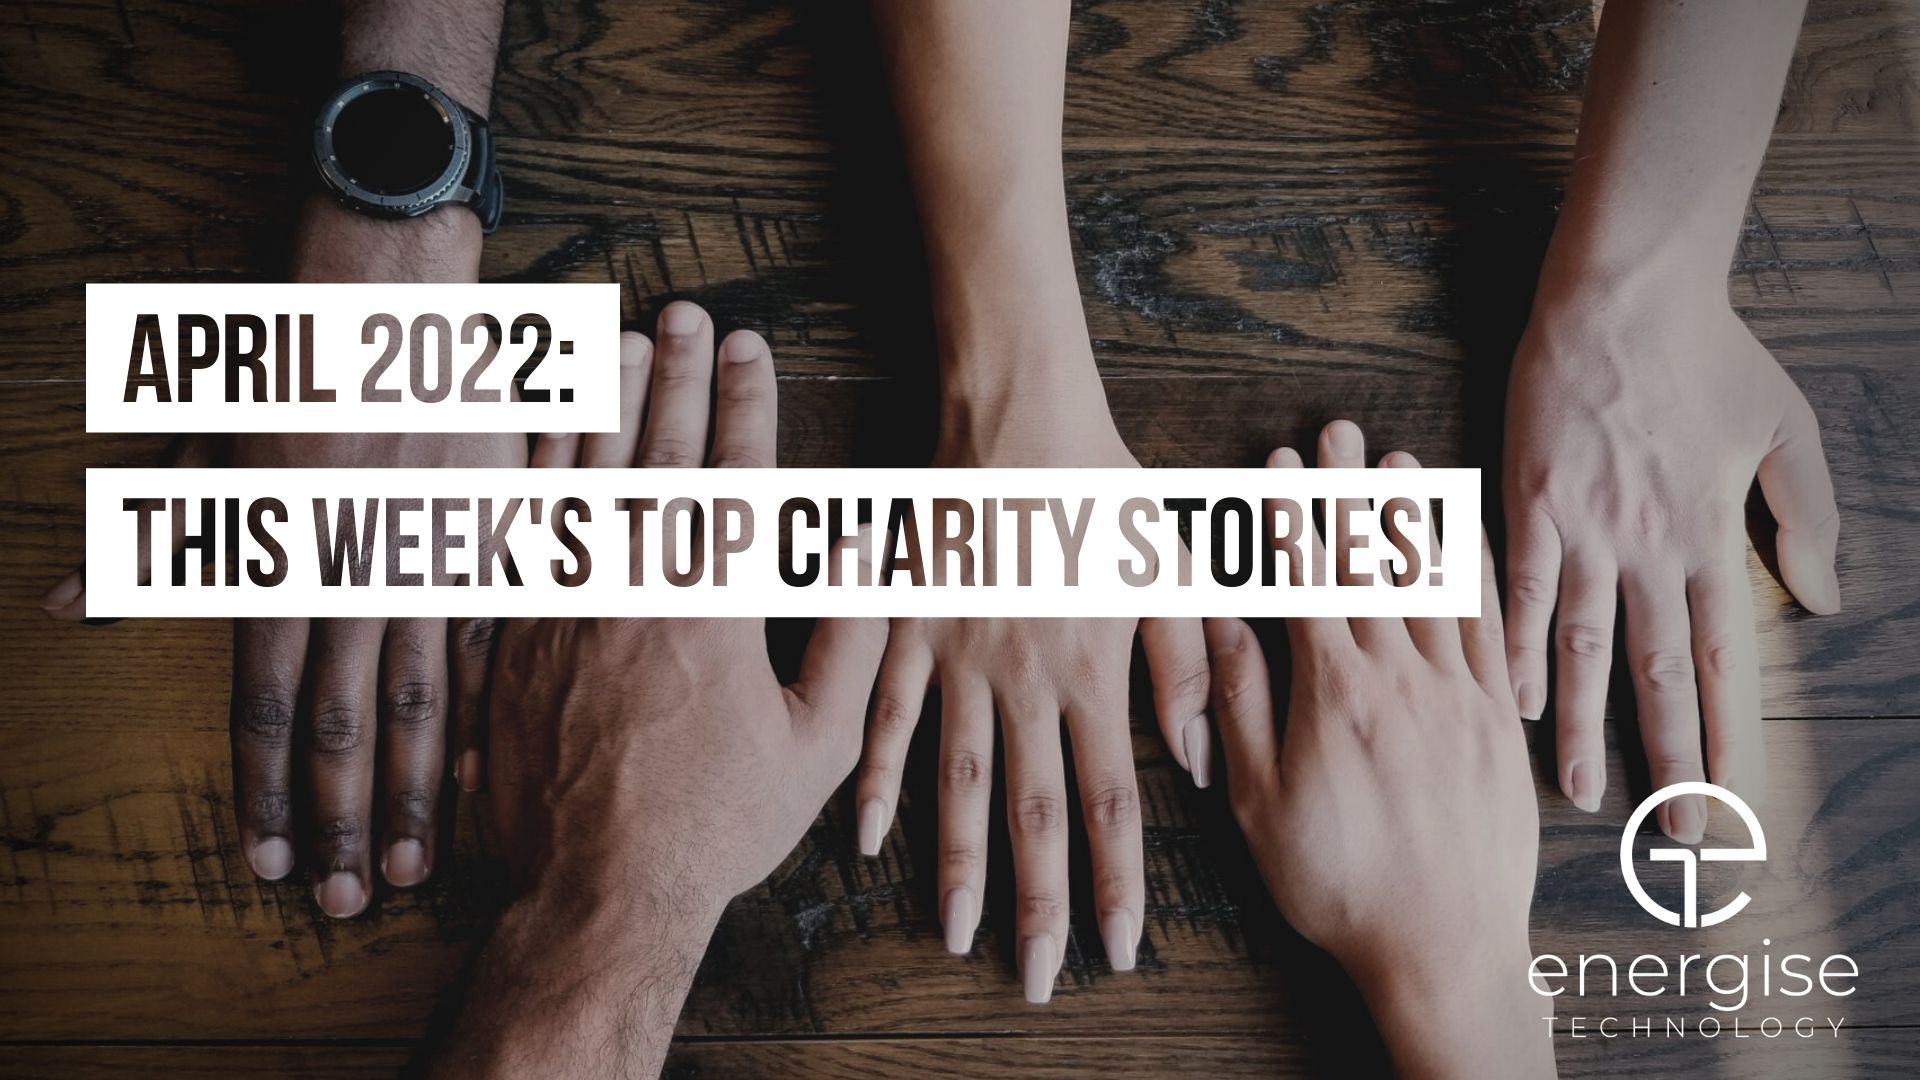 April 2022 Roundup - Top Charity Stories & Initiatives!